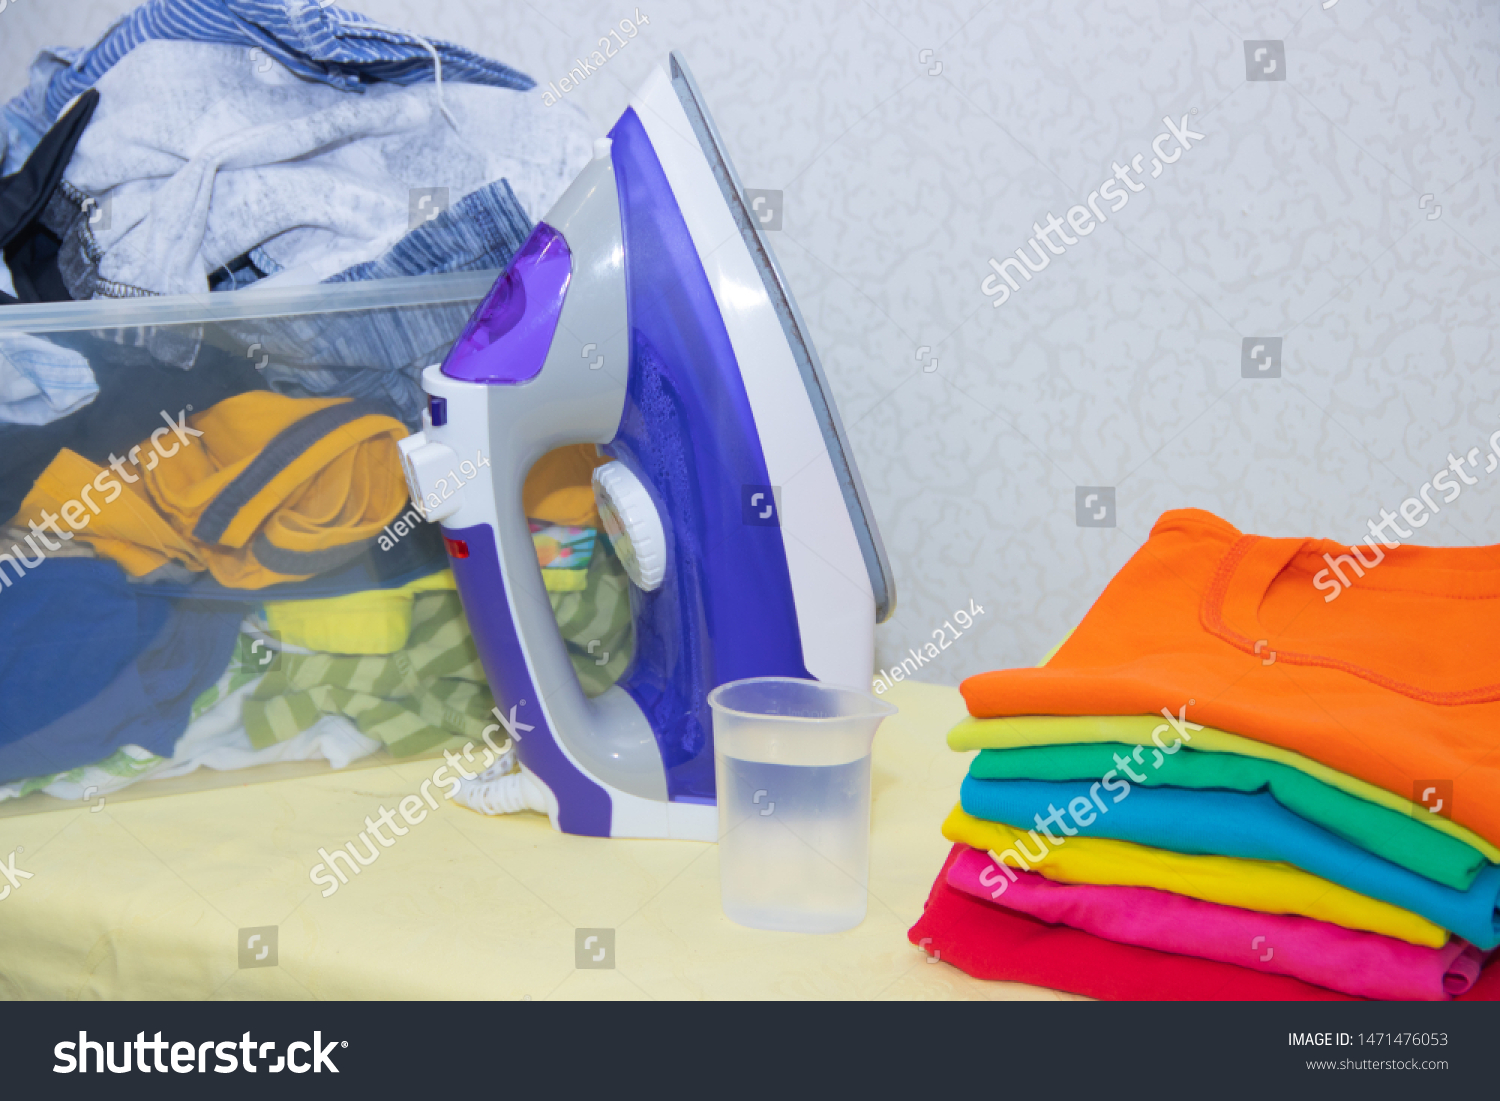 Iron and baby clothes. Colored clothes on an ironing board. Bright t-shirts. Ironed and non-ironed colored children's underwear on the board. Ironing board. A pile of things. #1471476053